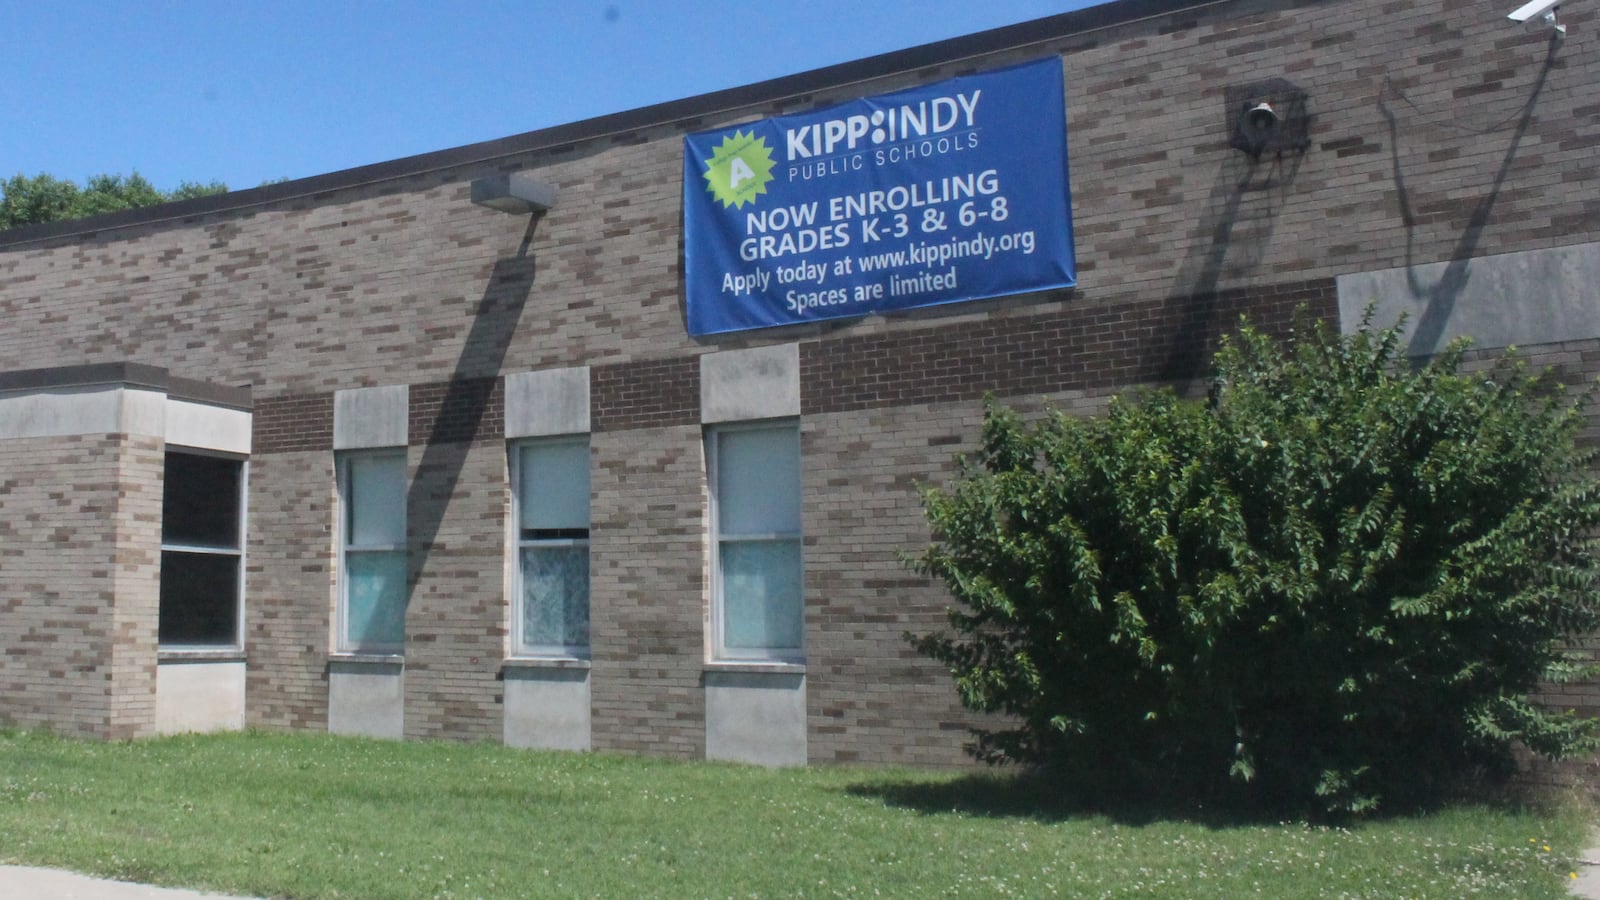 KIPP Indy was one of several schools in the county to receive a counseling grant.